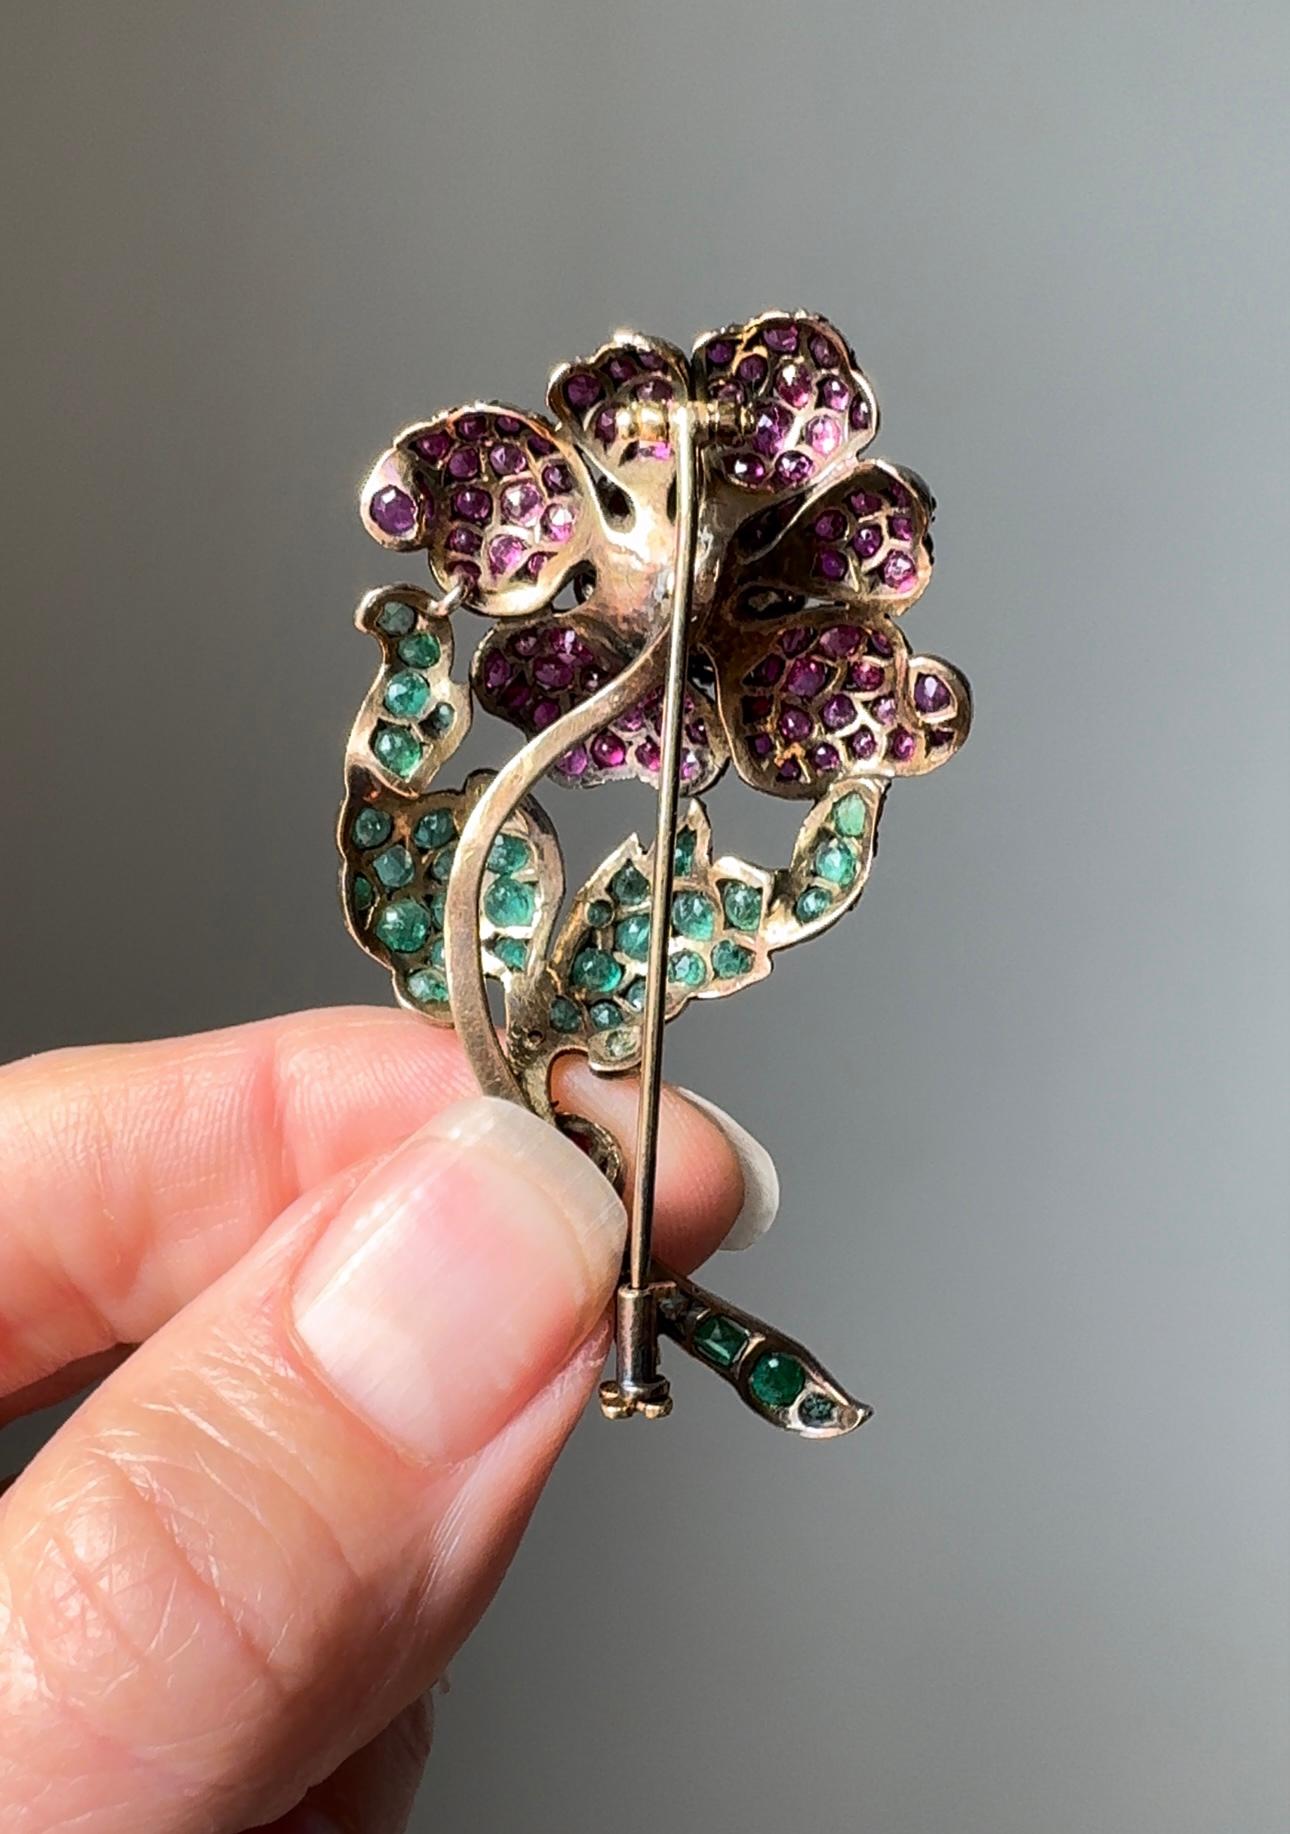 Fit for a queen, this timelessly elegant late 19th century rose is designed with delicately curled petals filled with vibrant raspberry red rubies complimented by bright green emerald leaves, expertly hand fabricated silver topped gold.

